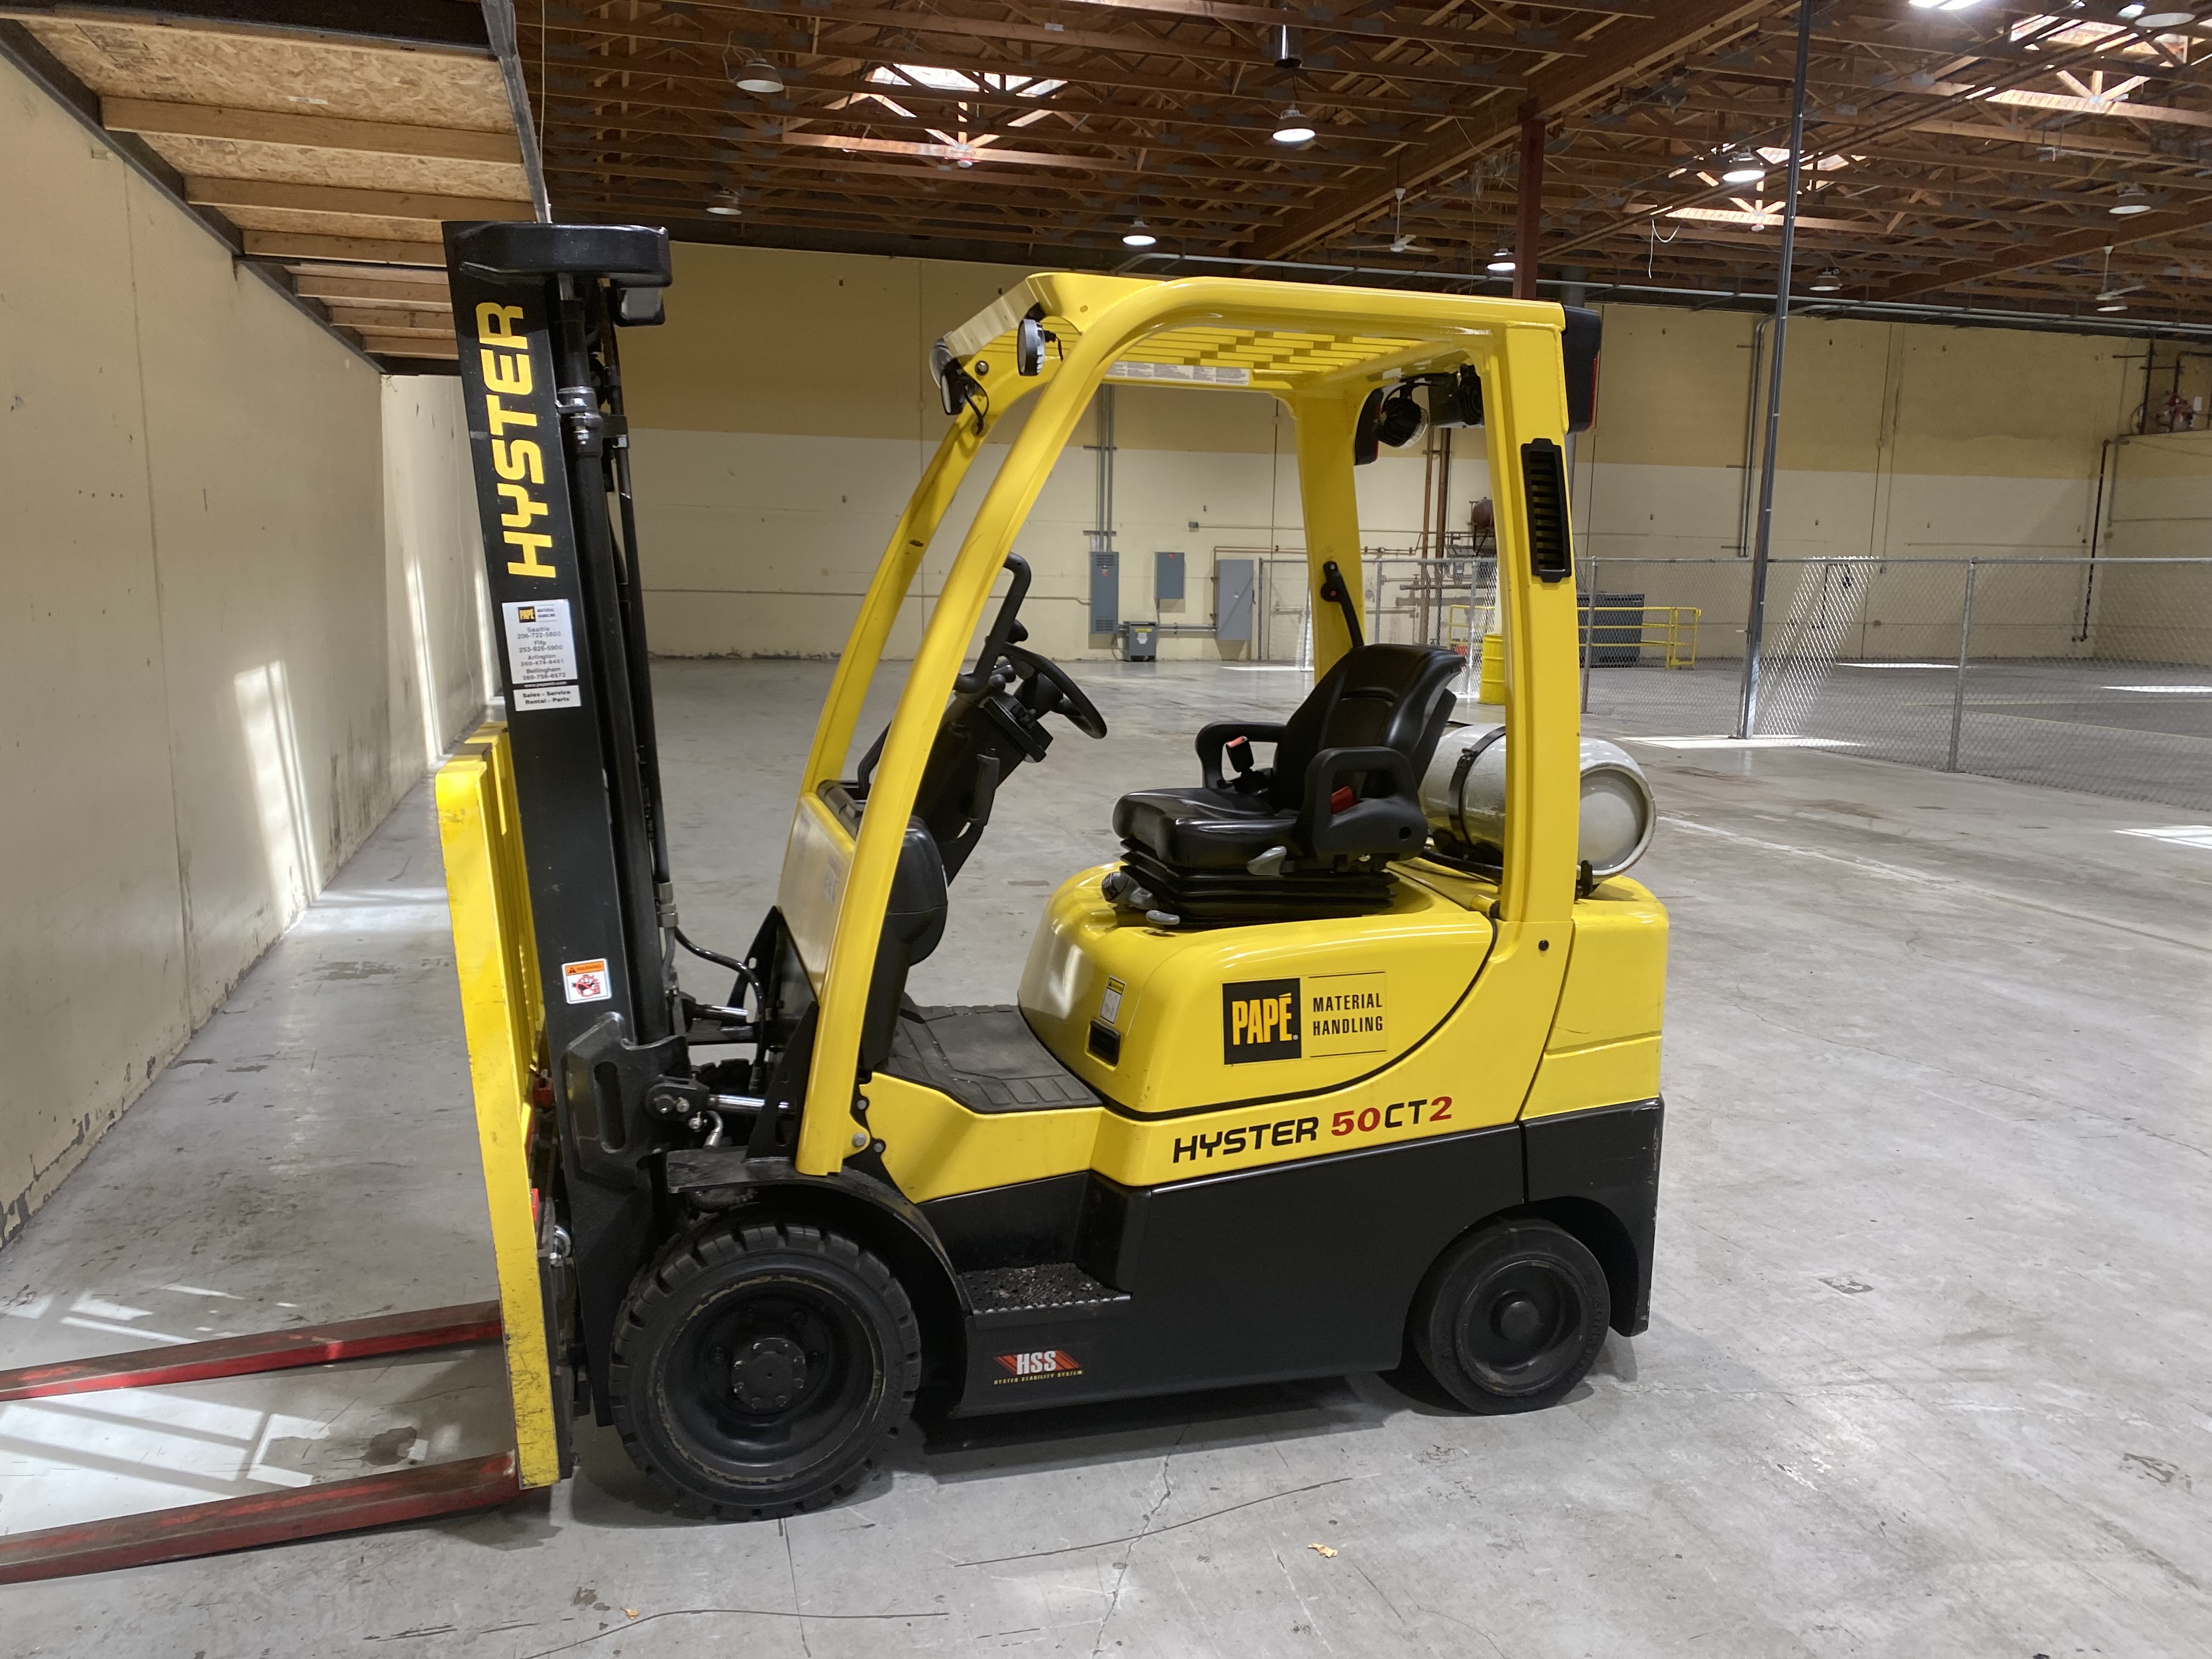 S50CT2 Hyster 2018